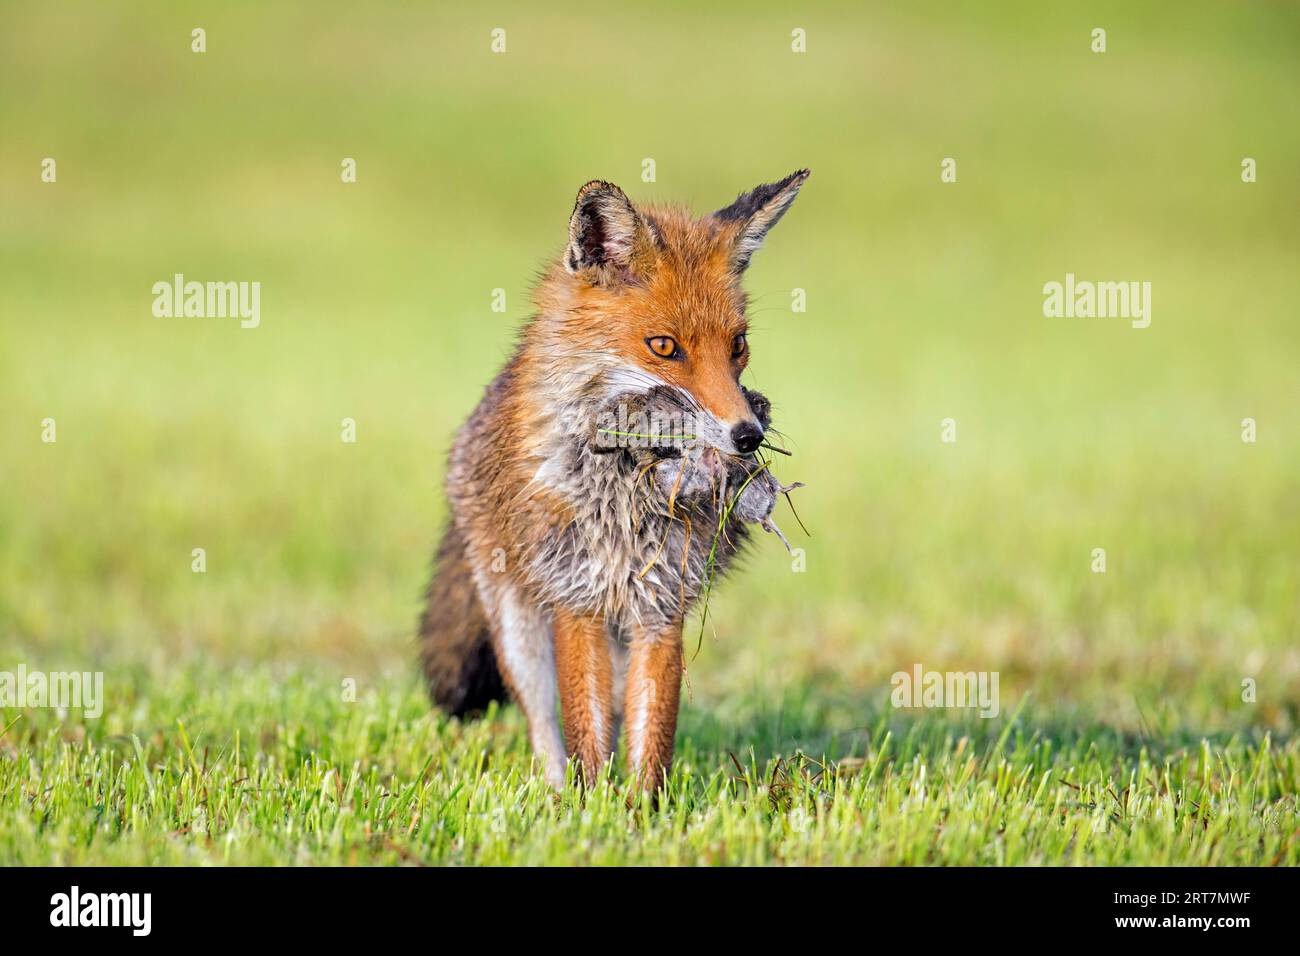 Red fox (Vulpes vulpes) in freshly mowed meadow / cut grassland returning with mouthful of mice prey / voles to feed its young kits / cubs in spring Stock Photo